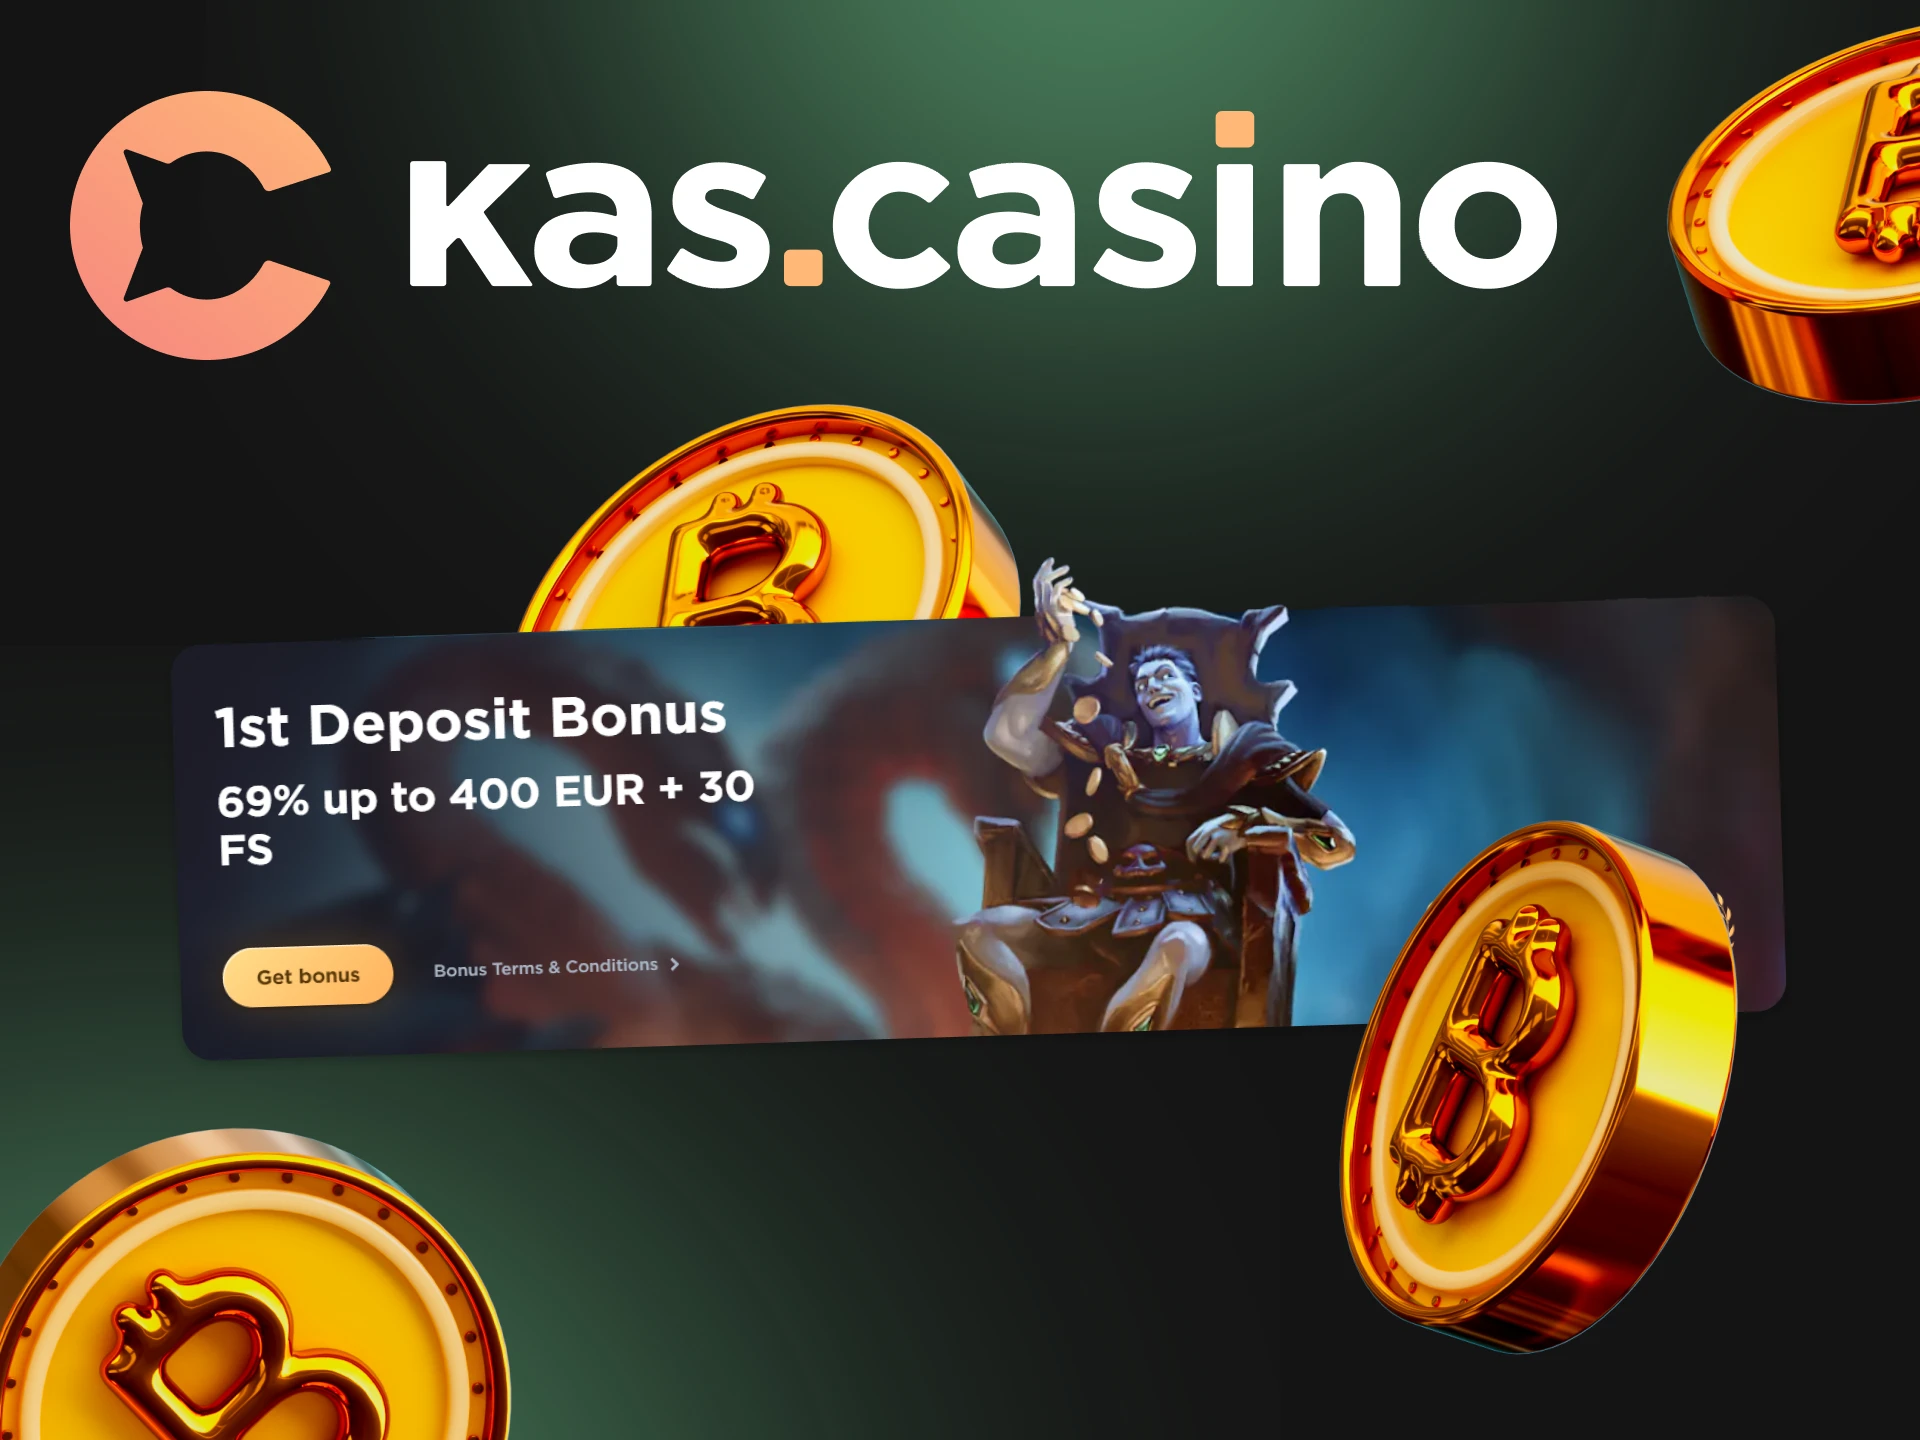 At the crypto casino Kas Casino you can find a large number of bonuses and play many profitable games.